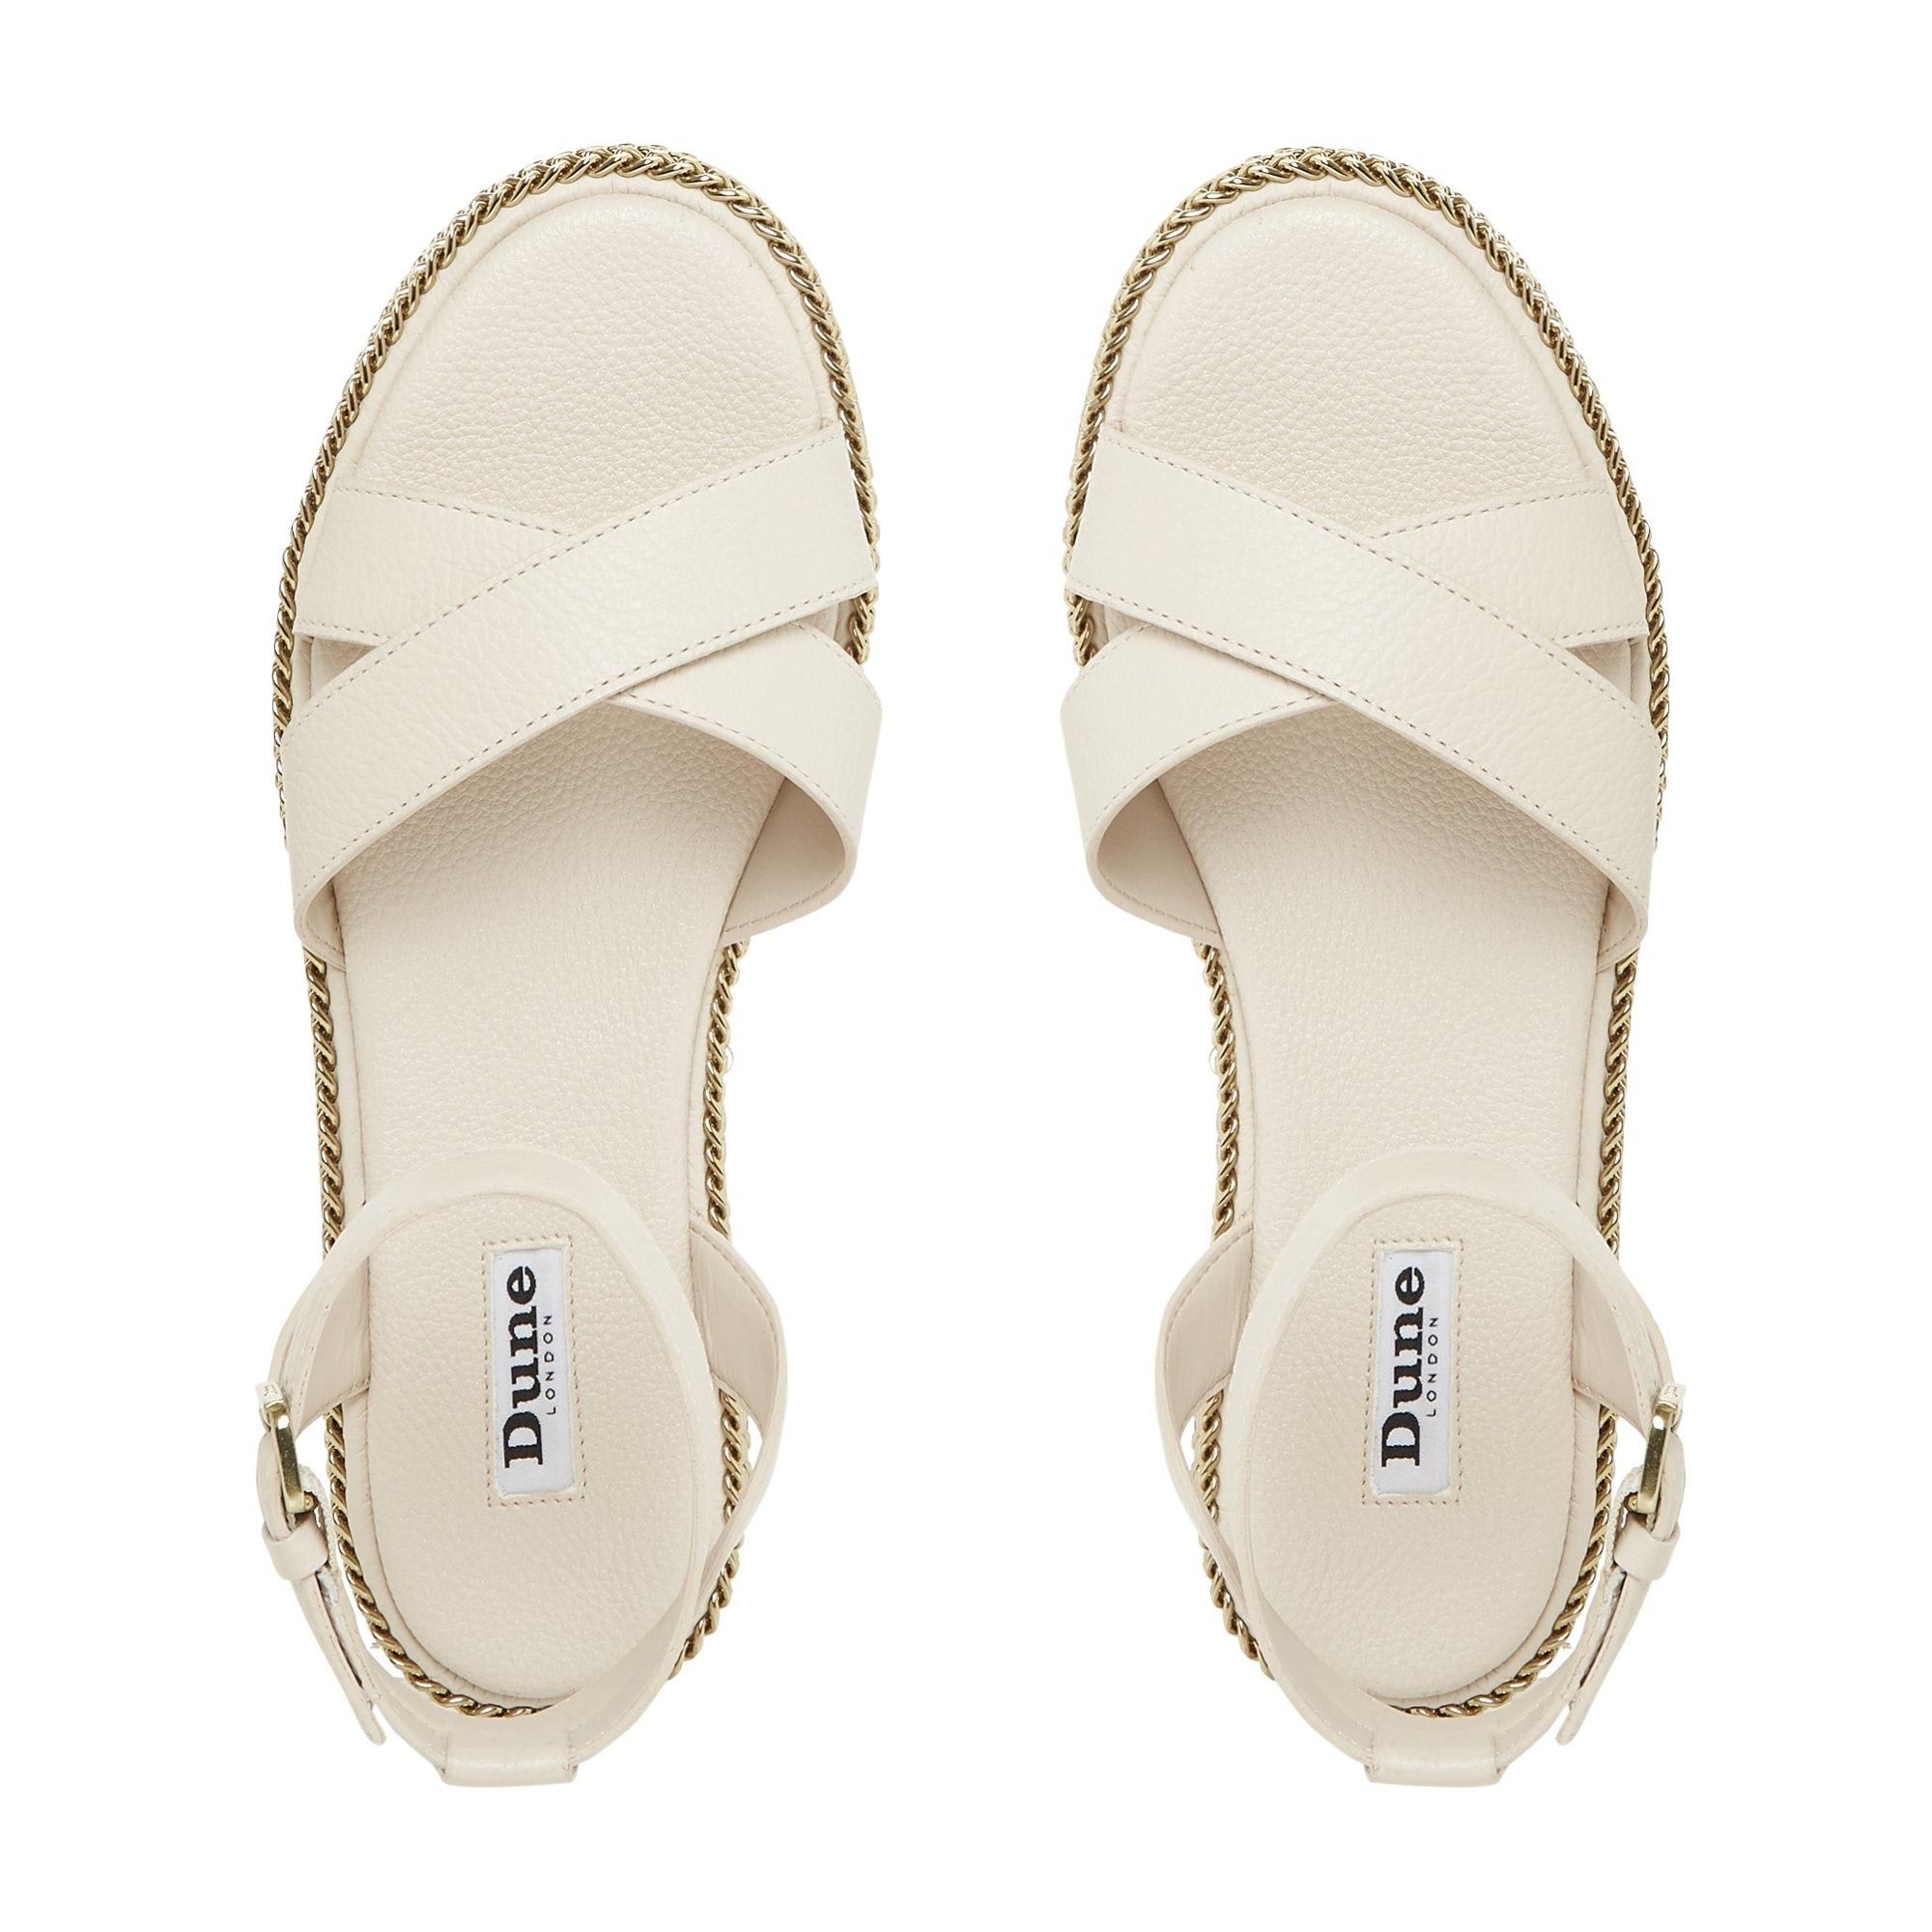 Toughen up summer and holiday edits with this sandal. Fitted with a buckled ankle strap and crossed bands at the upper. Its comfortable chunky sole is embellished with striking chains.